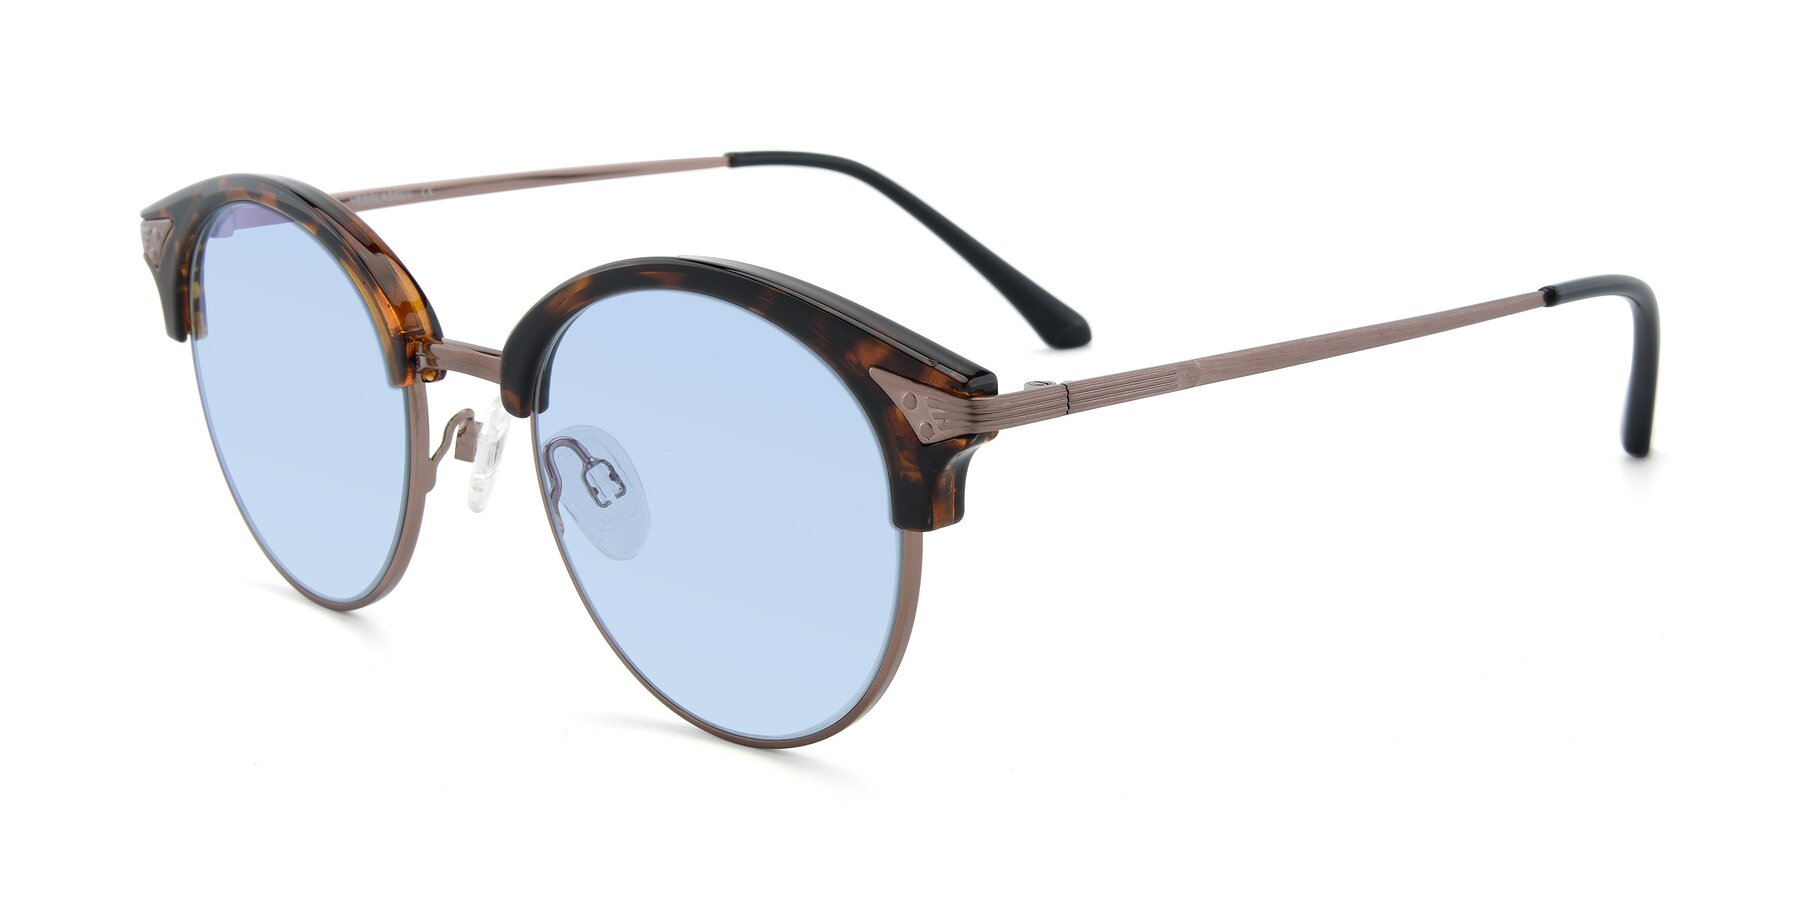 Angle of Hermione in Tortoise-Brown with Light Blue Tinted Lenses